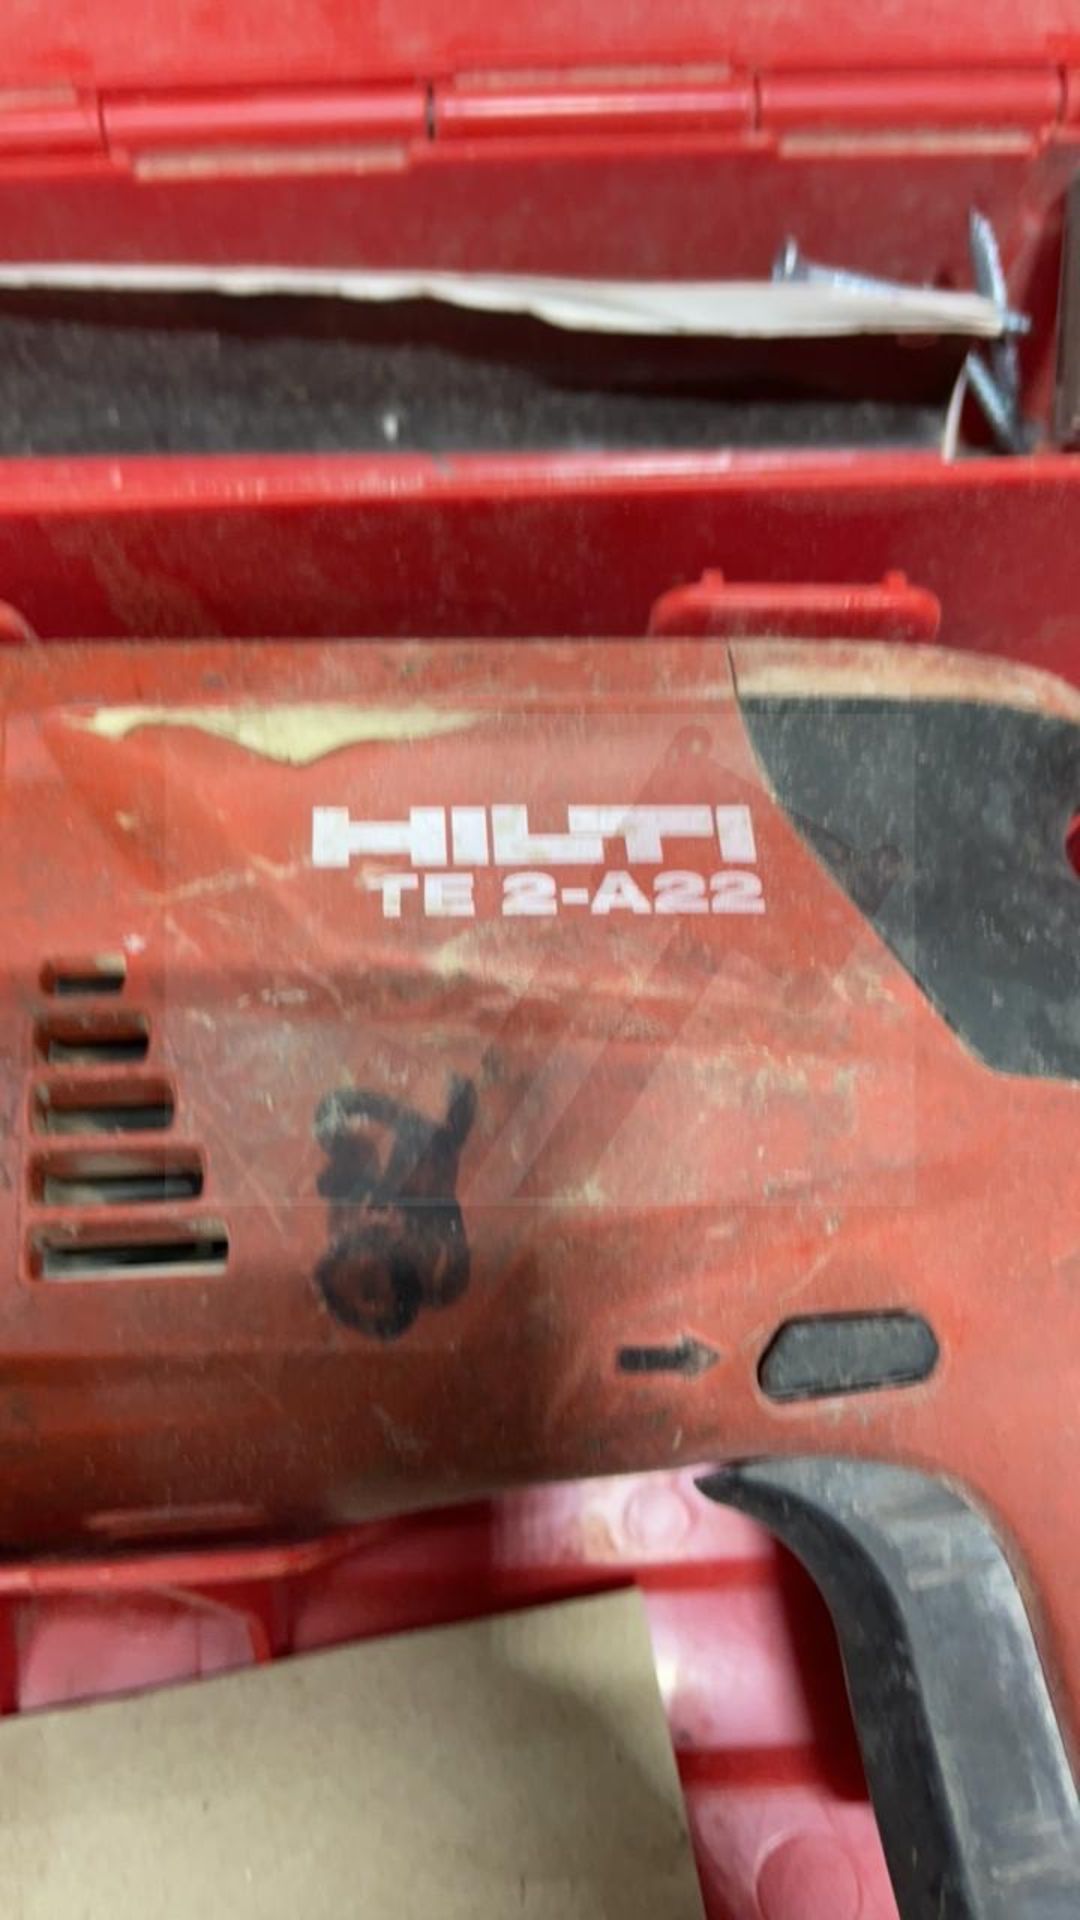 HILTI TE 2-A22 Cordless Rotary Hammer - Image 4 of 6